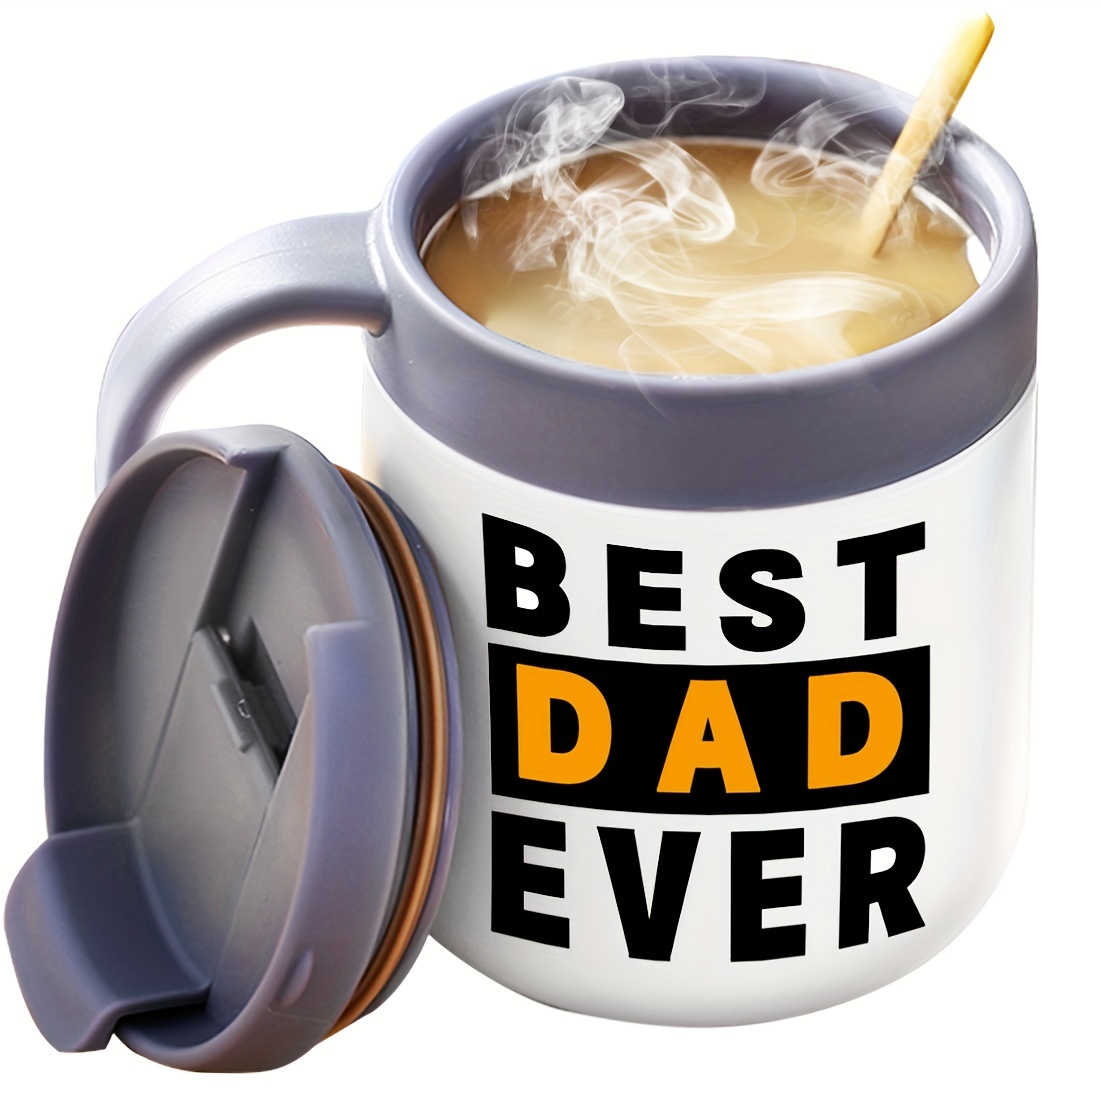 

1pc, Gifts For Dad, Dad Mug, Best Dad Ever Mug, Dad Gifts, Insulated Coffee Mug With Handle And Lid, Funny Dad Christmas Birthday Gifts For Husband Men Him, Fathers Gift Day From Wife Son Daughter